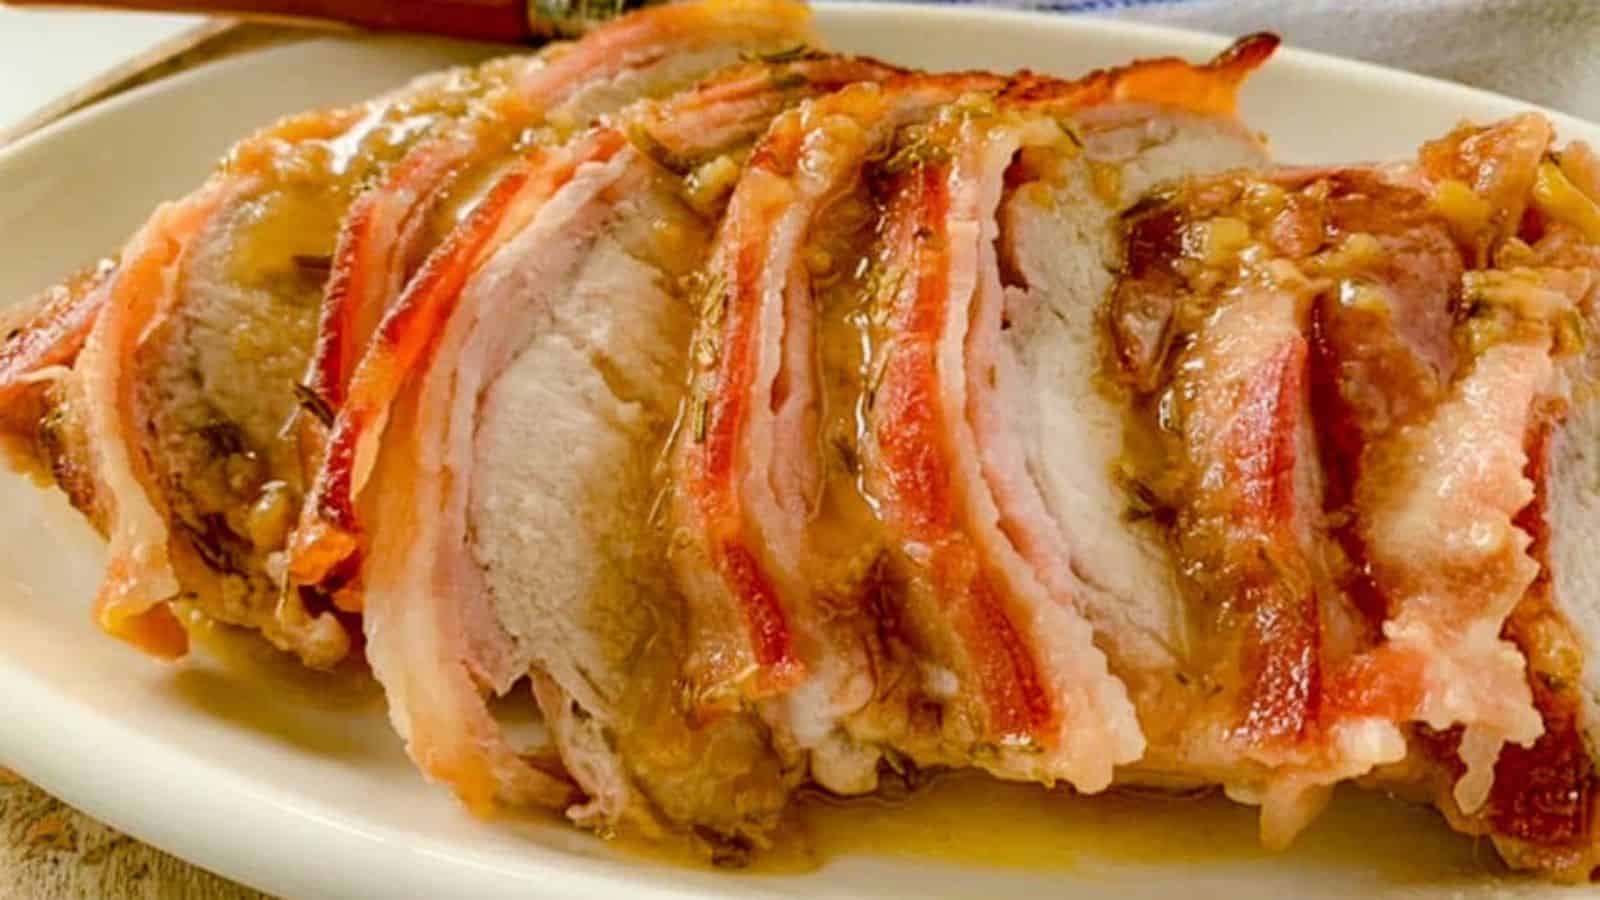 A platter piled with bacon-wrapped pork tenderloin slices and pan juices.